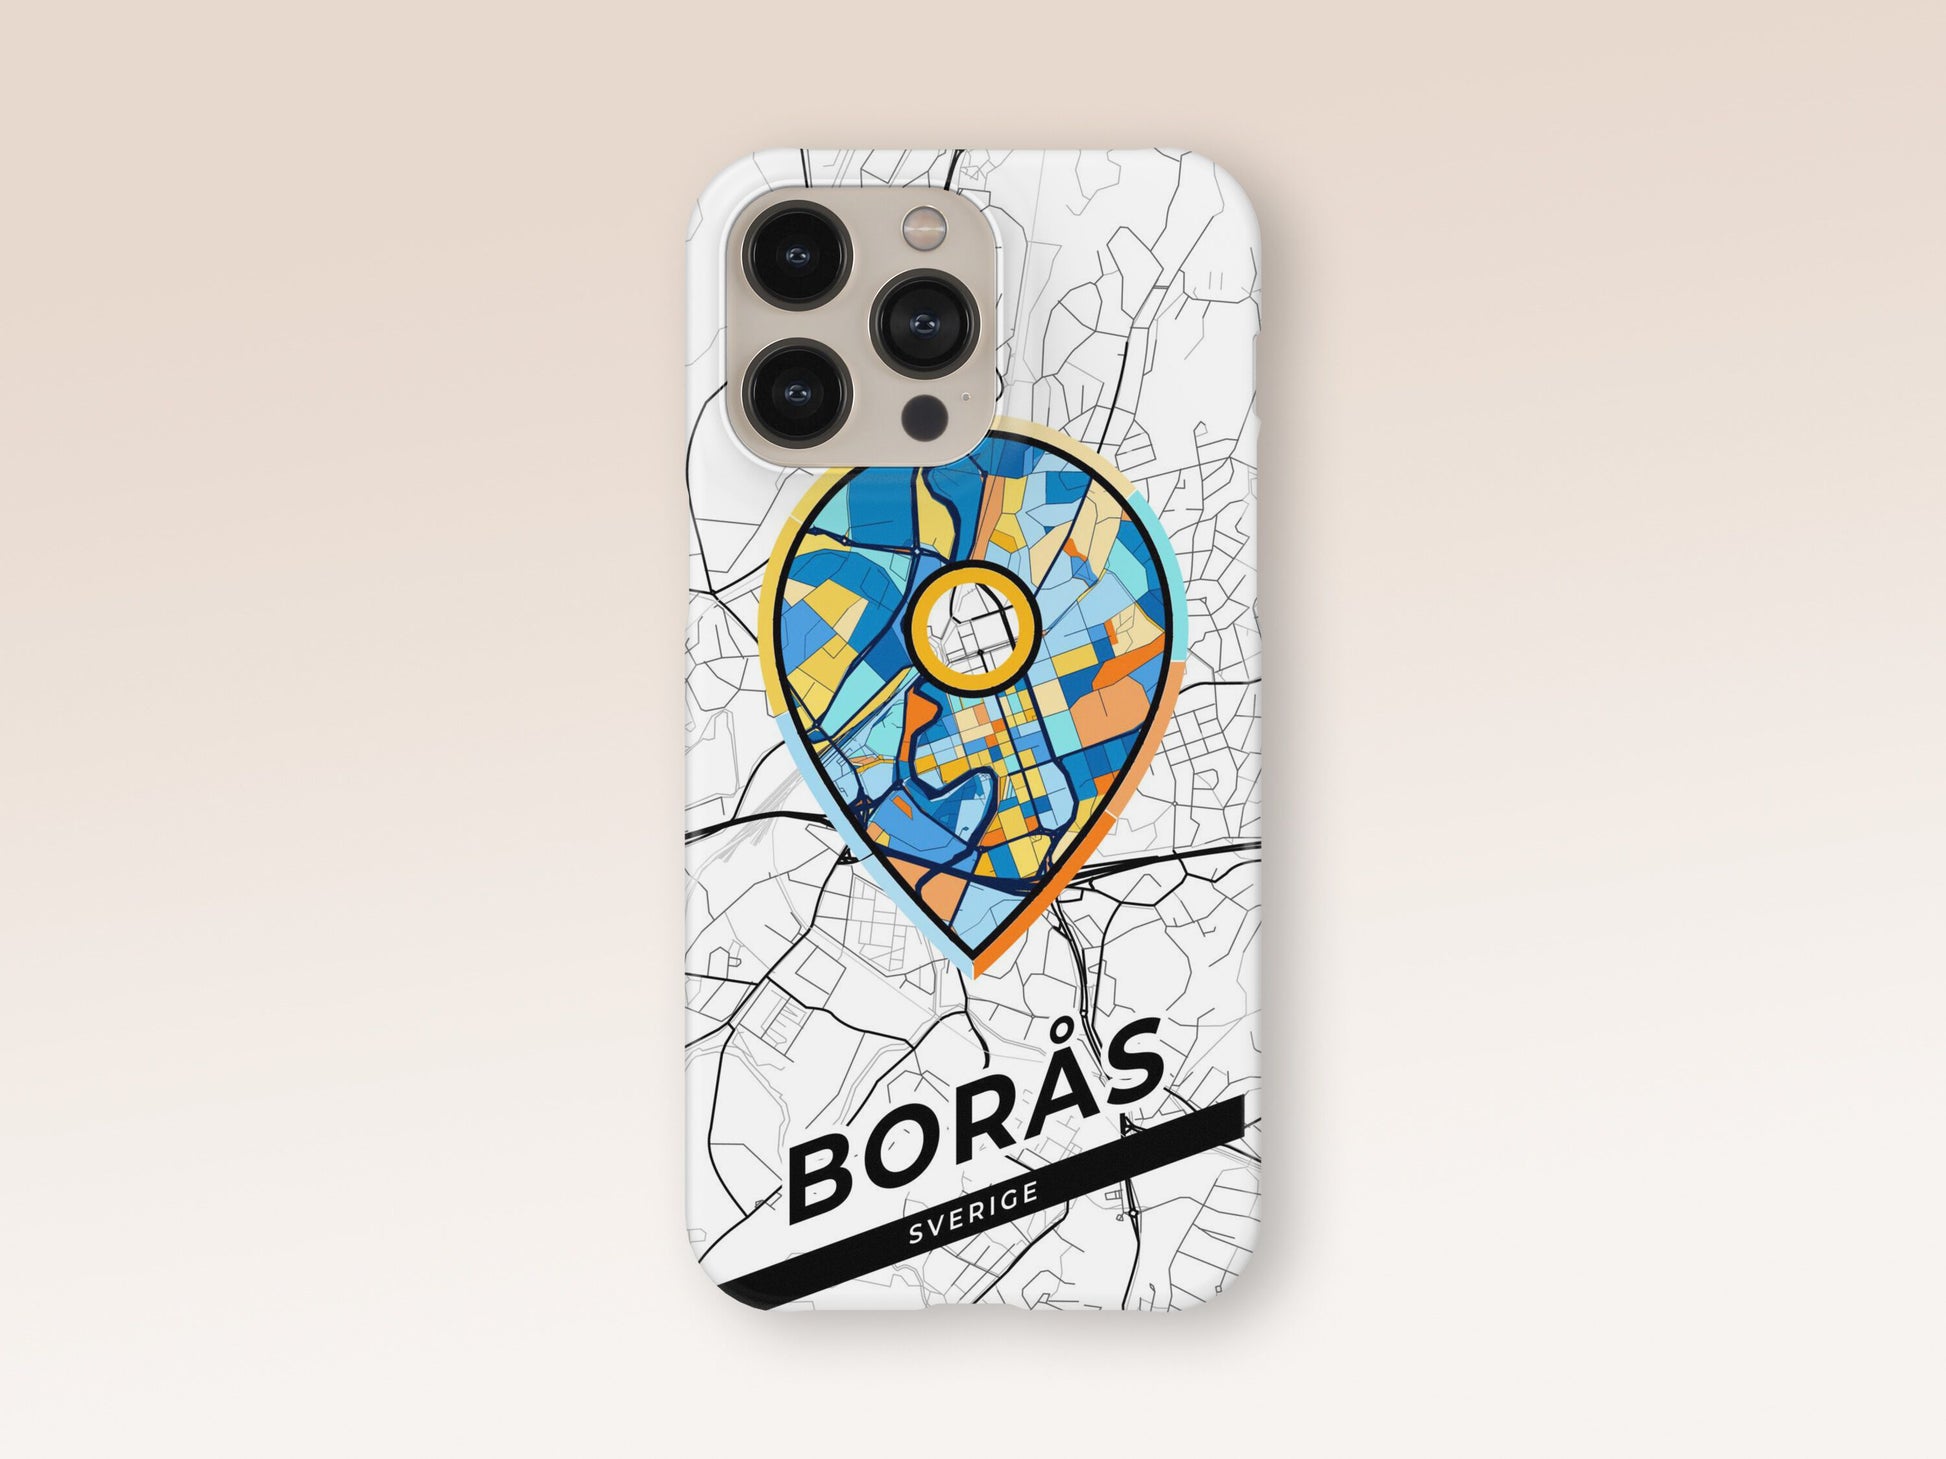 Borås Sweden slim phone case with colorful icon. Birthday, wedding or housewarming gift. Couple match cases. 1